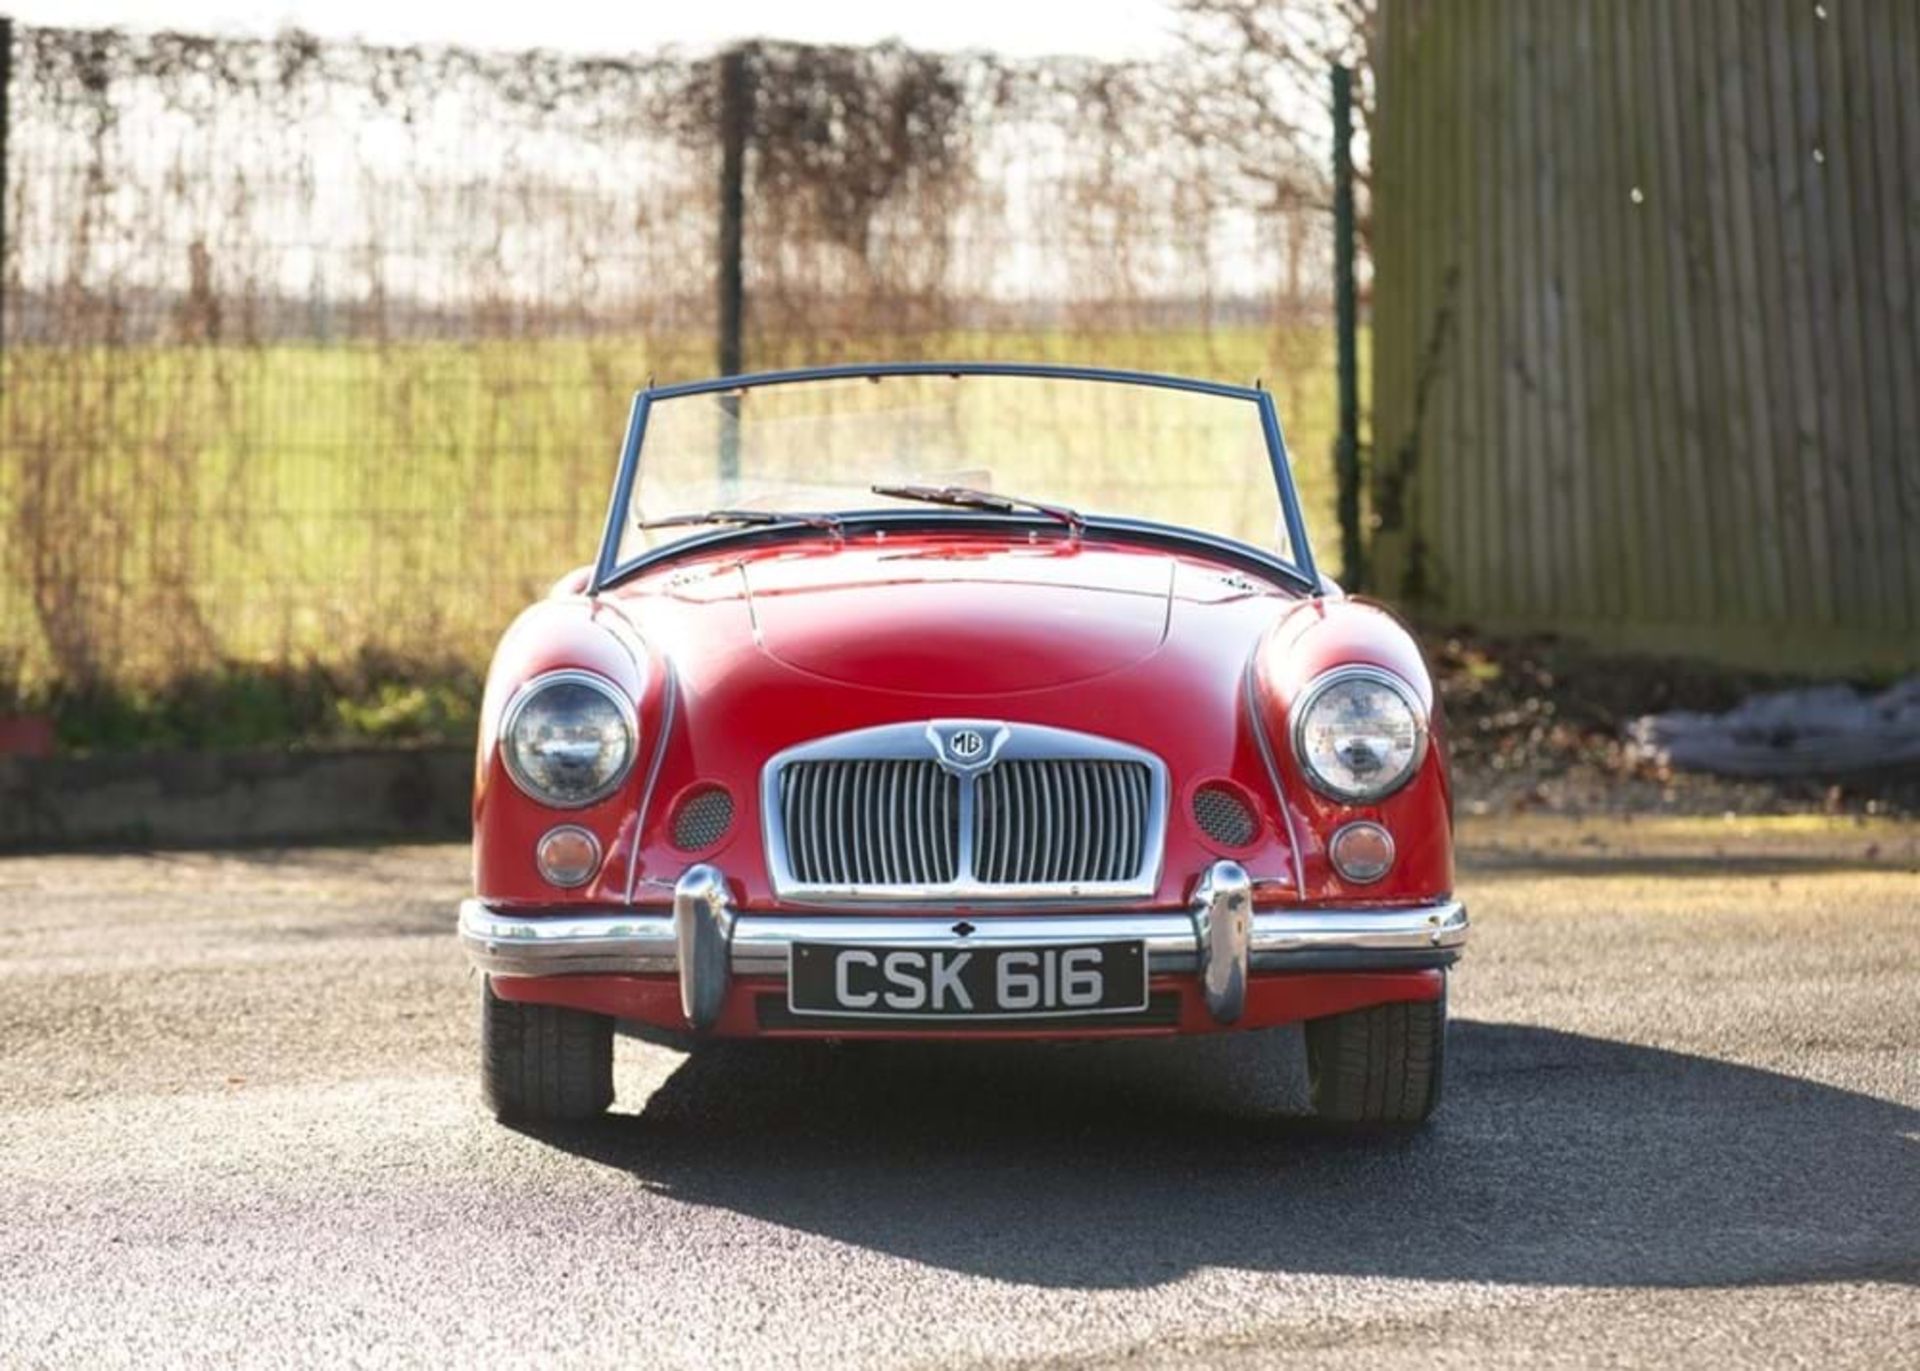 1960 MG A Roadster (Twincam) - Image 8 of 10